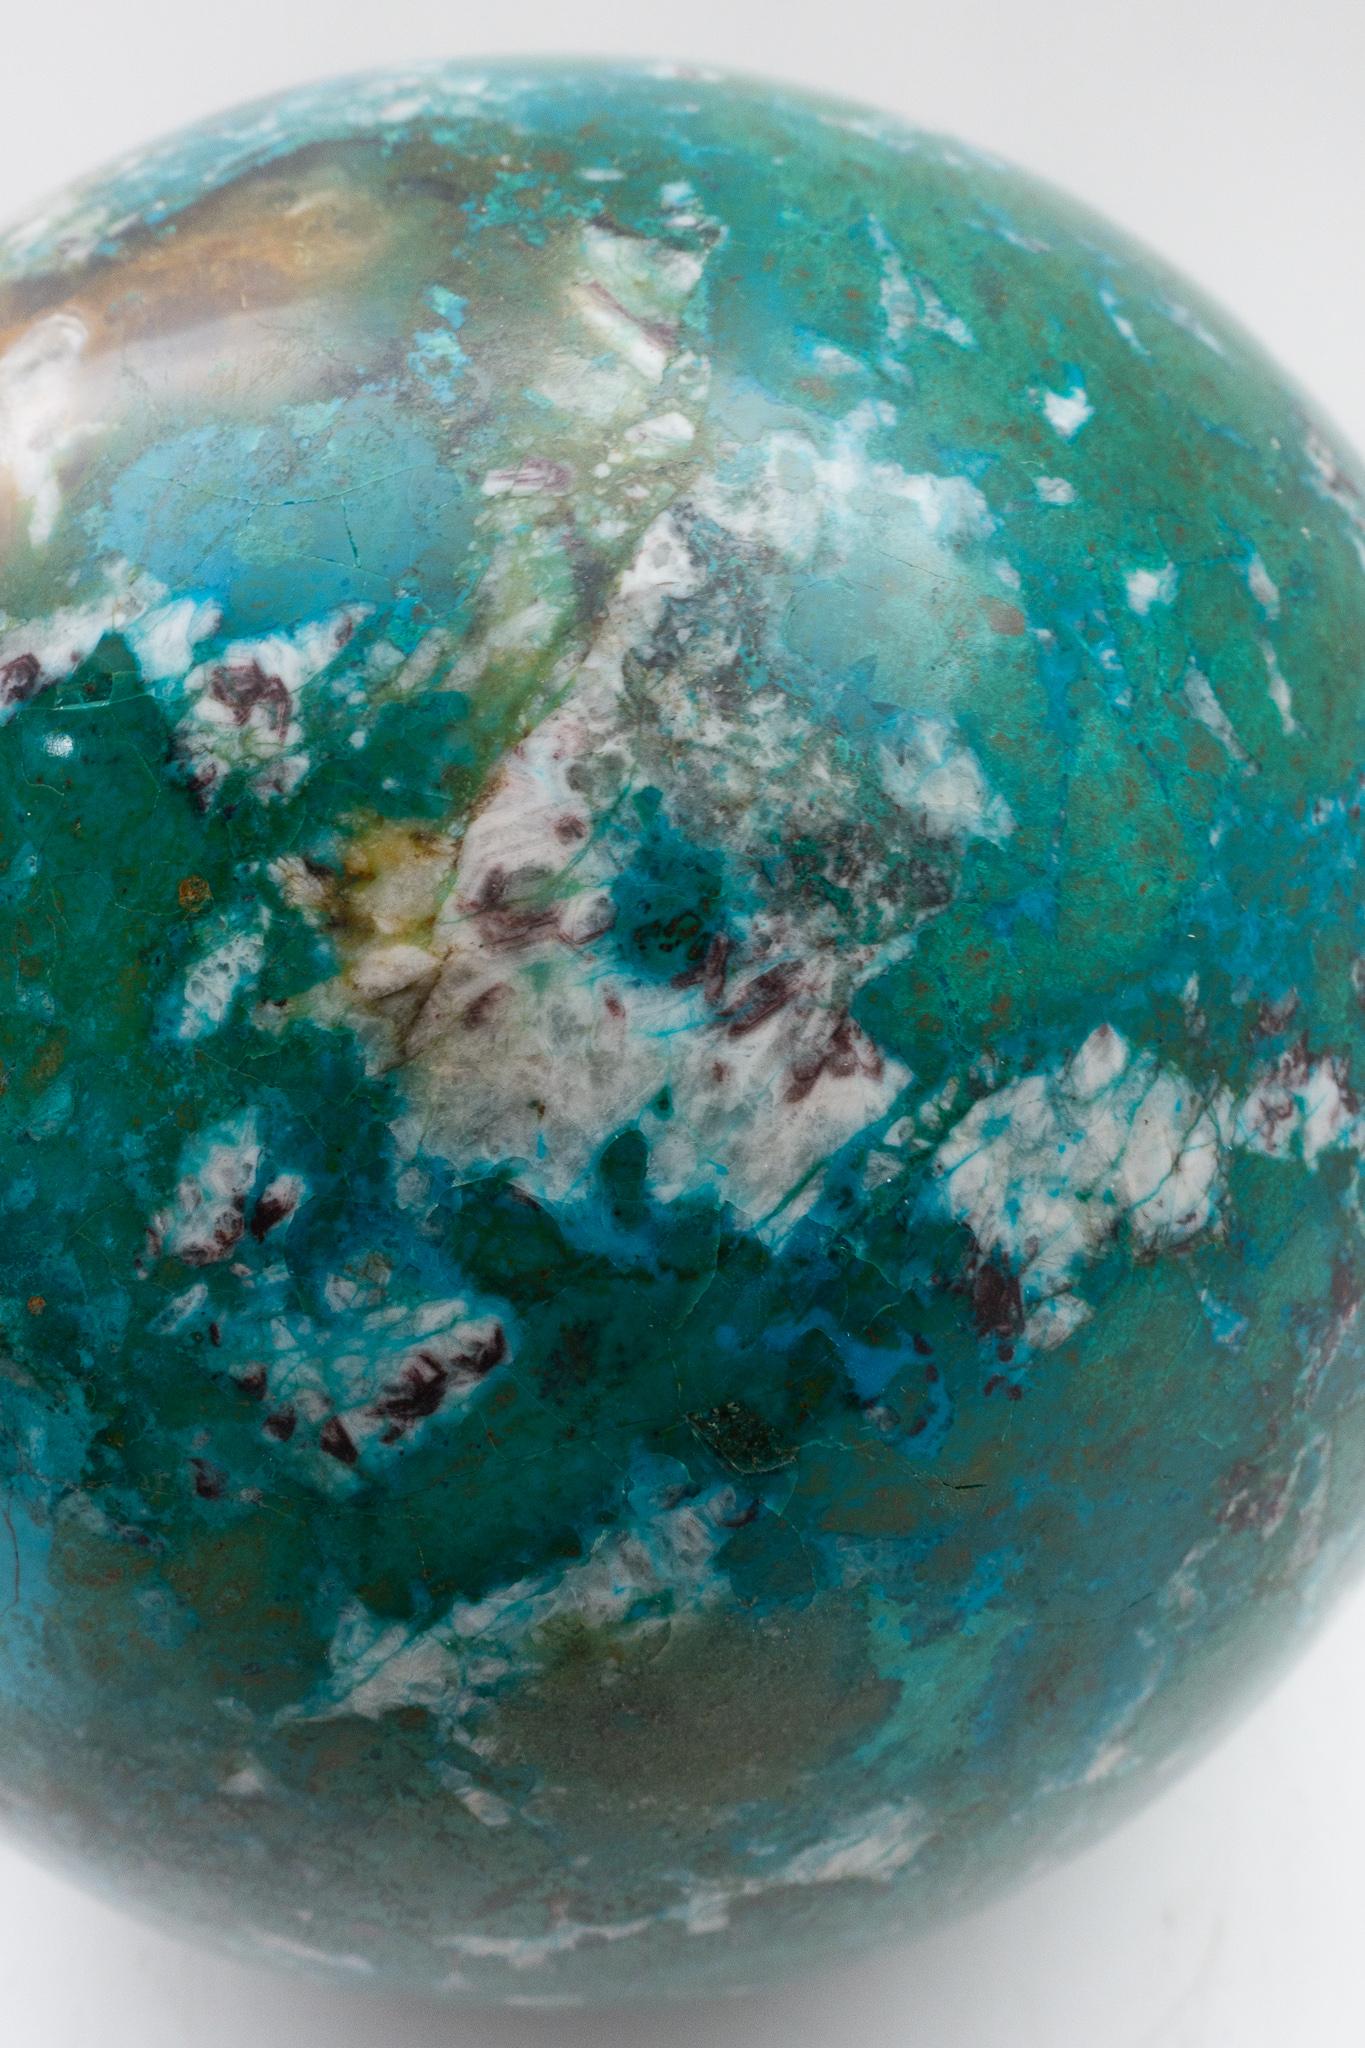 The beautiful blue-green of chrysocolla has made it a prized gemstone in ornamental use since antiquity. Chrysocolla has long believed to promote motivation and inspiration.